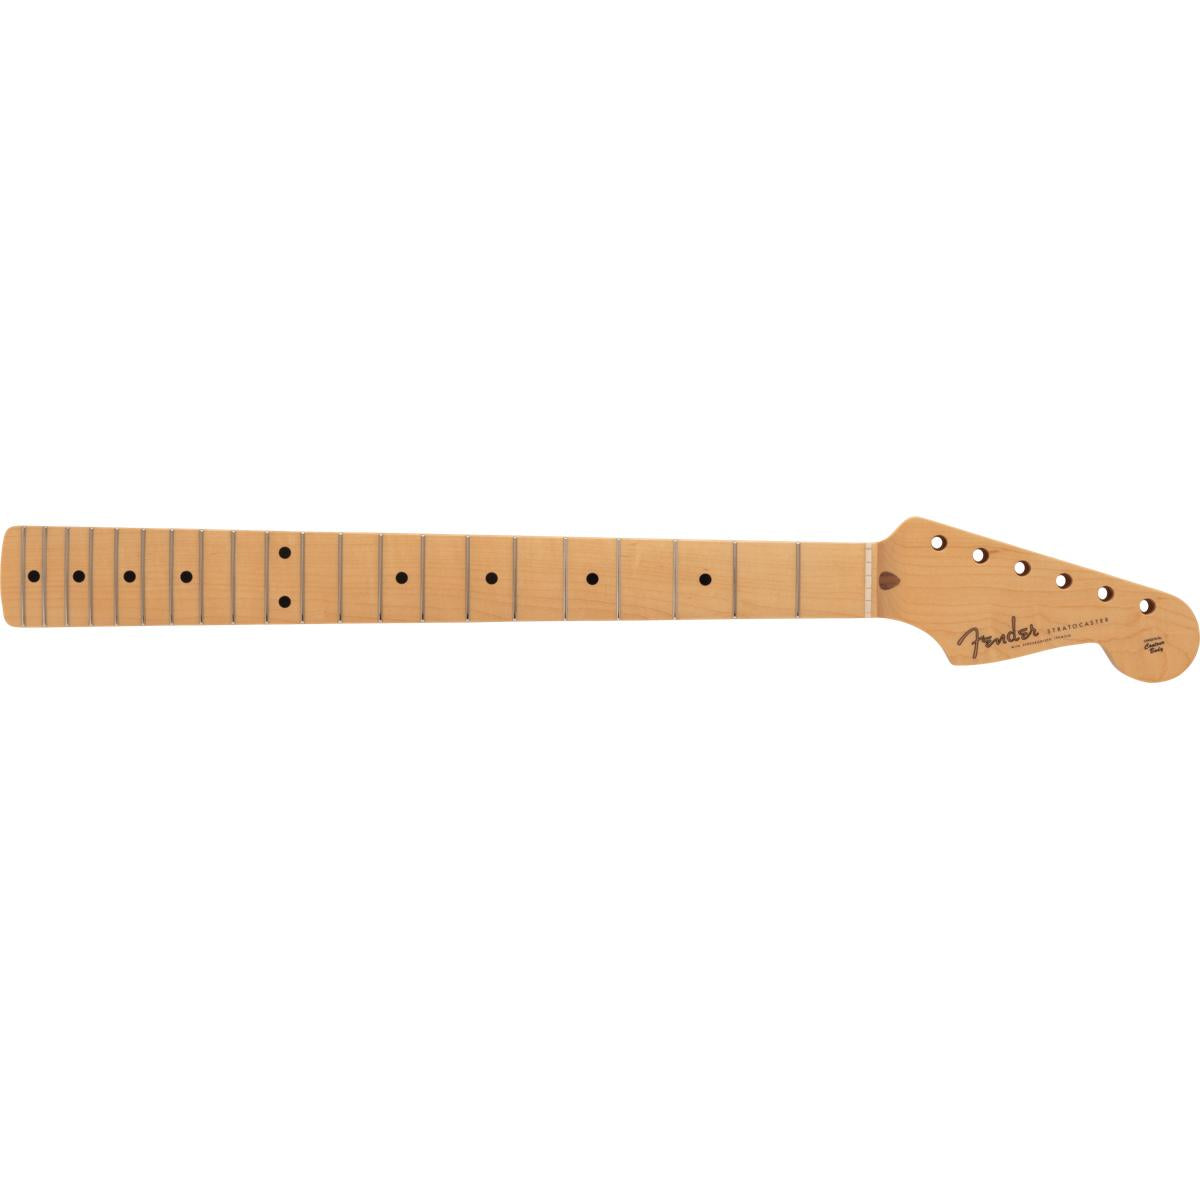 Fender-Made-in-Japan-Traditional-II-50s-Stratocaster-Neck-21-Vintage-Frets-9.5inch-Radius-U-Shape-Maple---0990502921